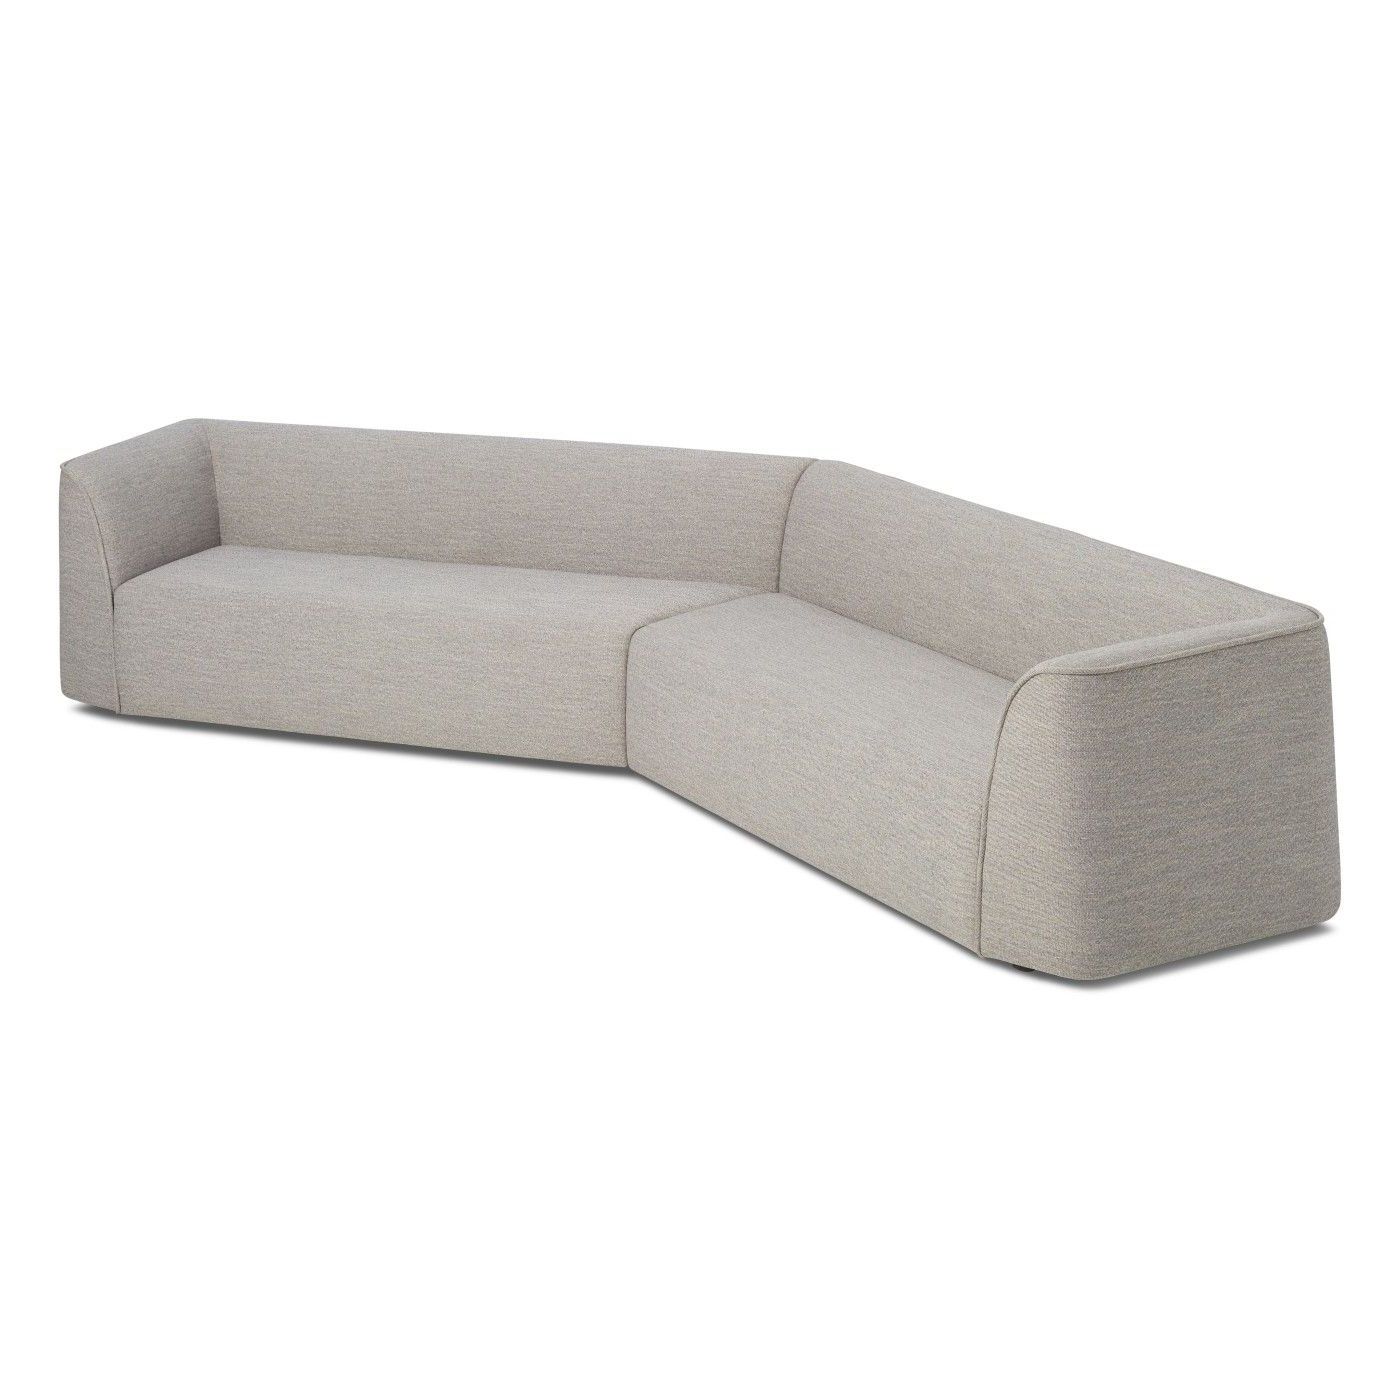 London Optical Reversible Sofa Chaise Sectionals In Most Popular Thataway Angled Sectional Sofa In  (View 12 of 20)